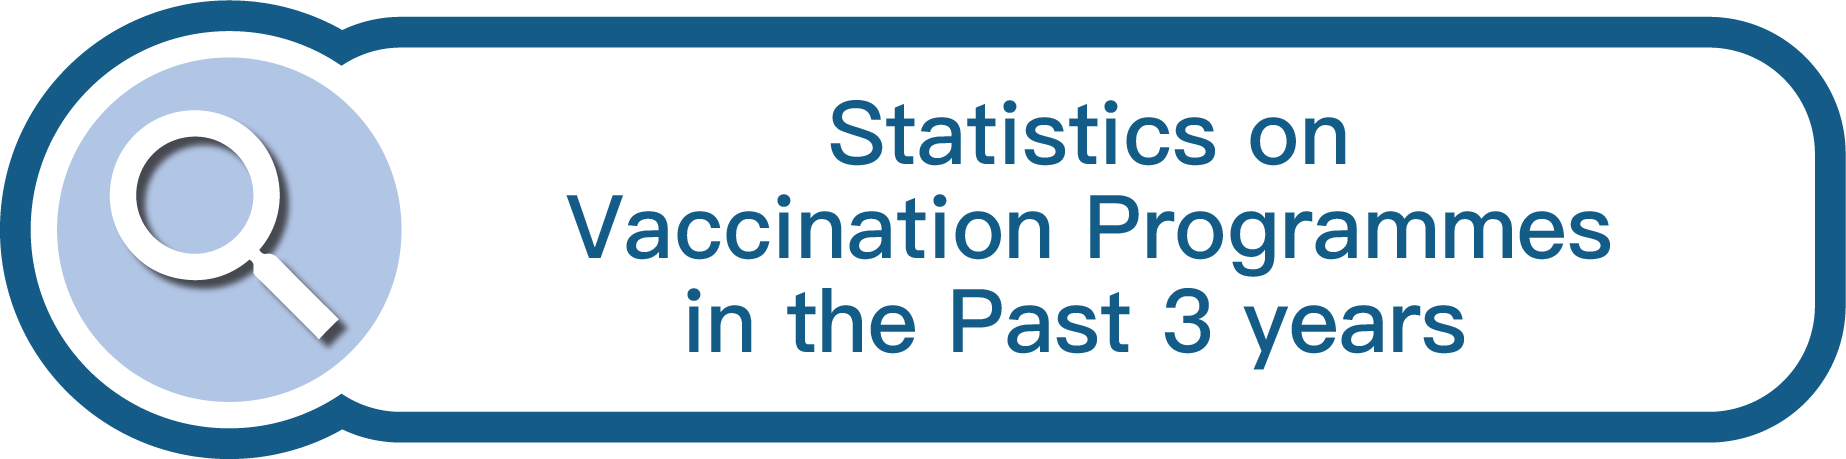 Statistics on Vaccination Programmes in the Past 3 Years